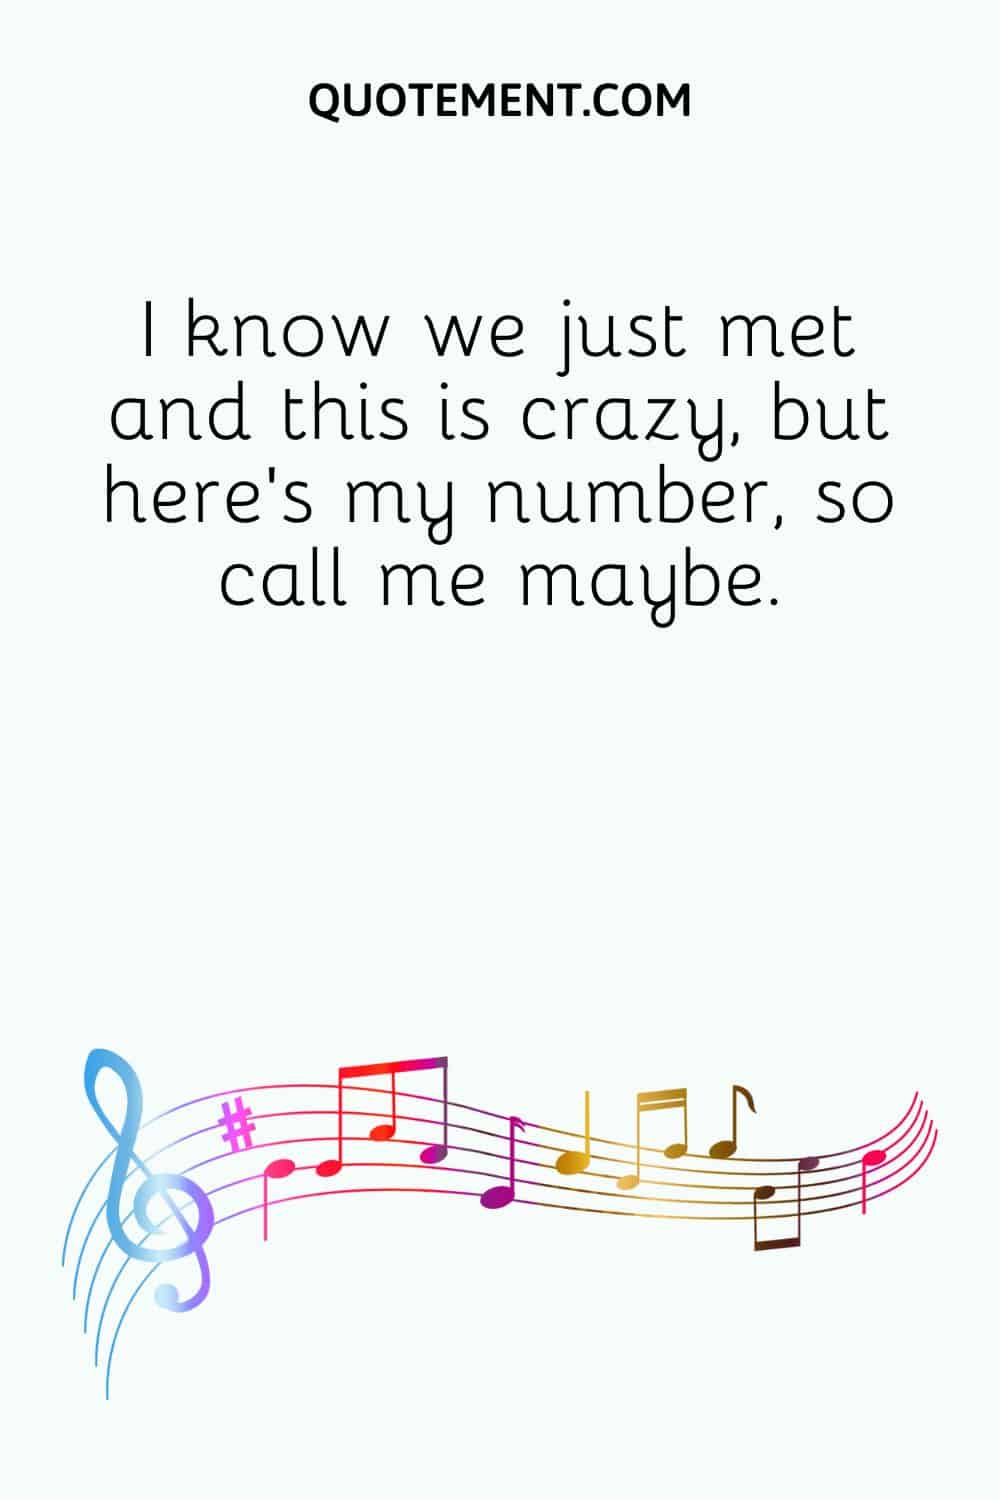 I know we just met and this is crazy, but here’s my number, so call me maybe